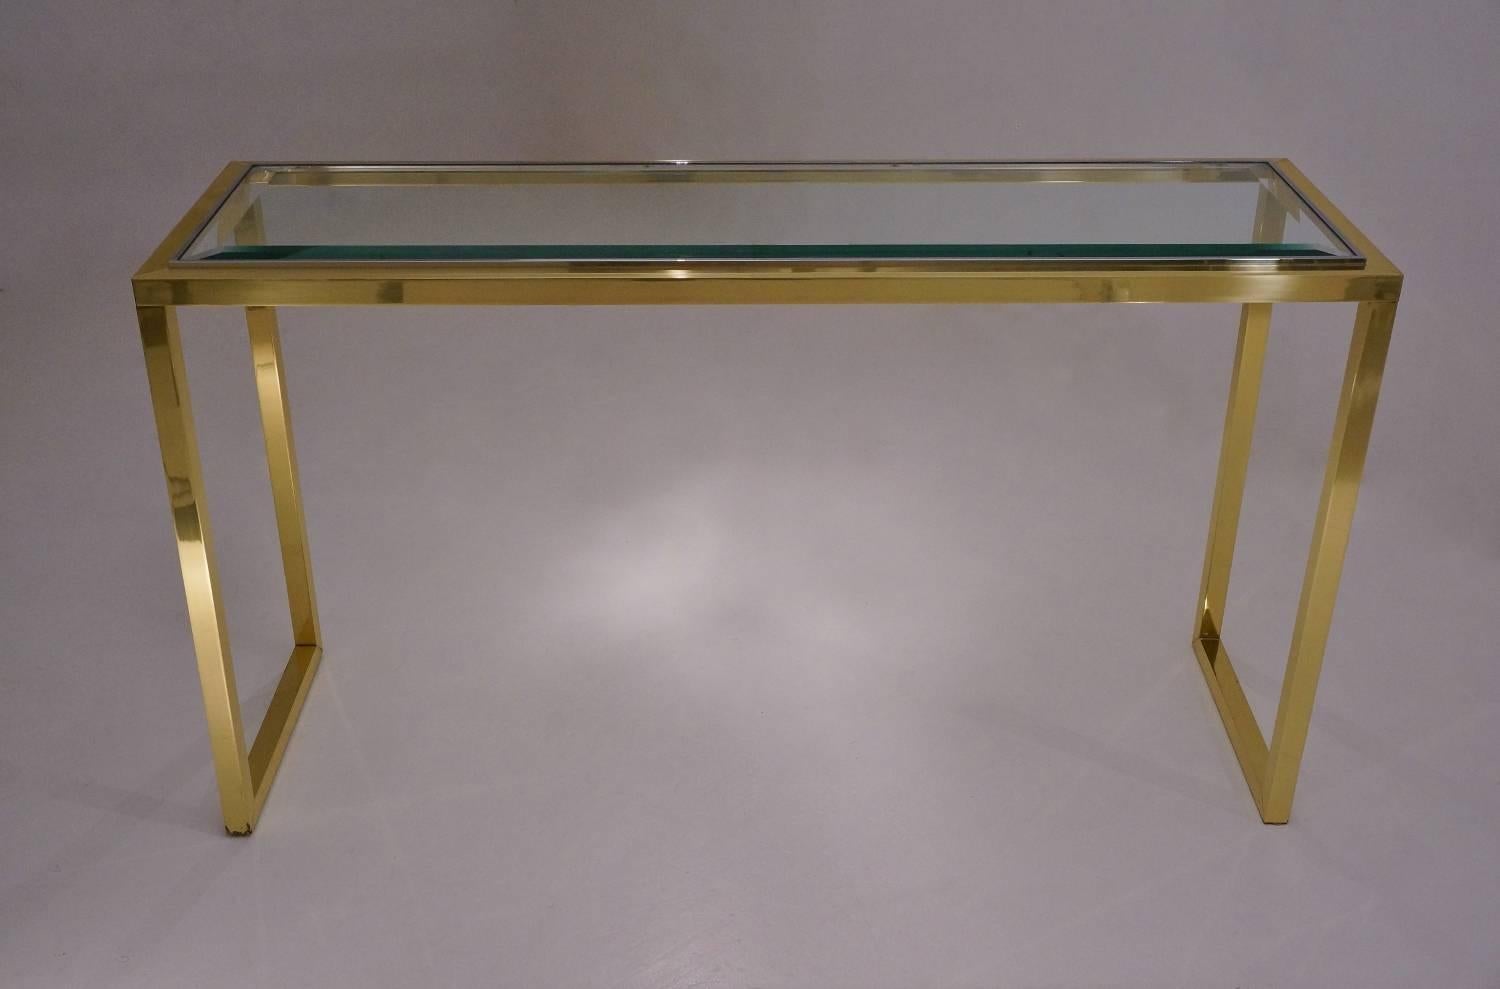 Willy Rizzo console table in brass, chrome and glass, circa 1970s, Italian.

This console has been thoroughly cleaned respecting the original lacquer and antique patina. It is ready to use. 

This Modernist console table is attributed to Italian